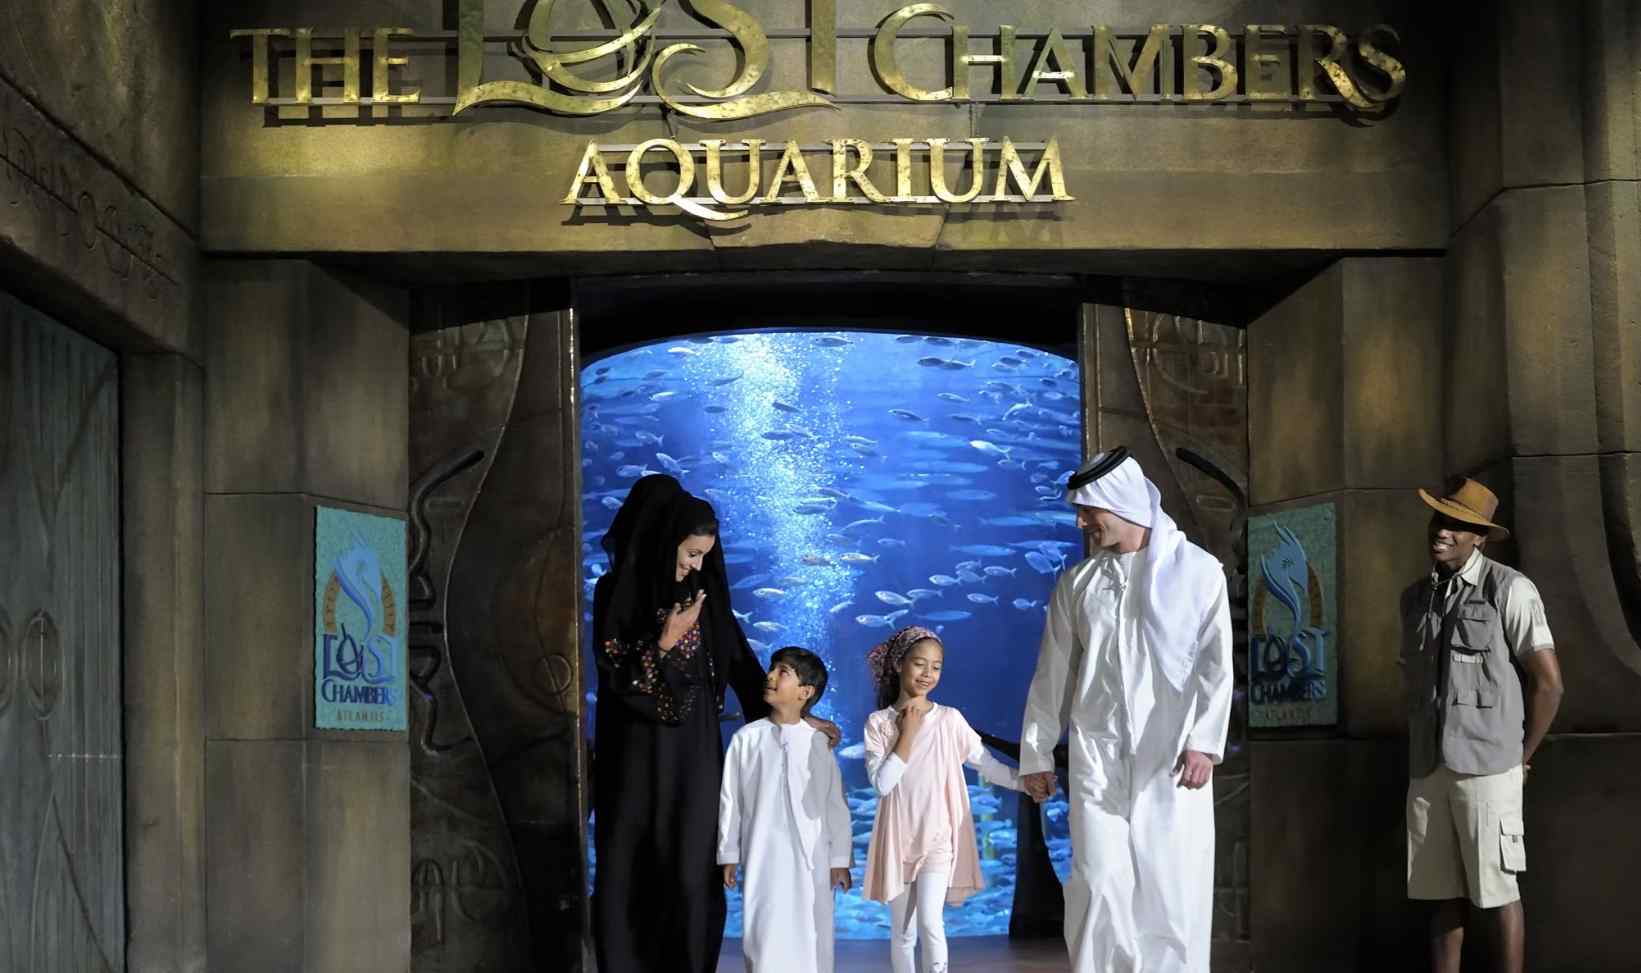 The palm aquarium is at 44J9+V7P Atlantis, The Palm, The Palm Jumeirah, Dubai. In Dubai, Atlantis, The Palm is my go-to place.